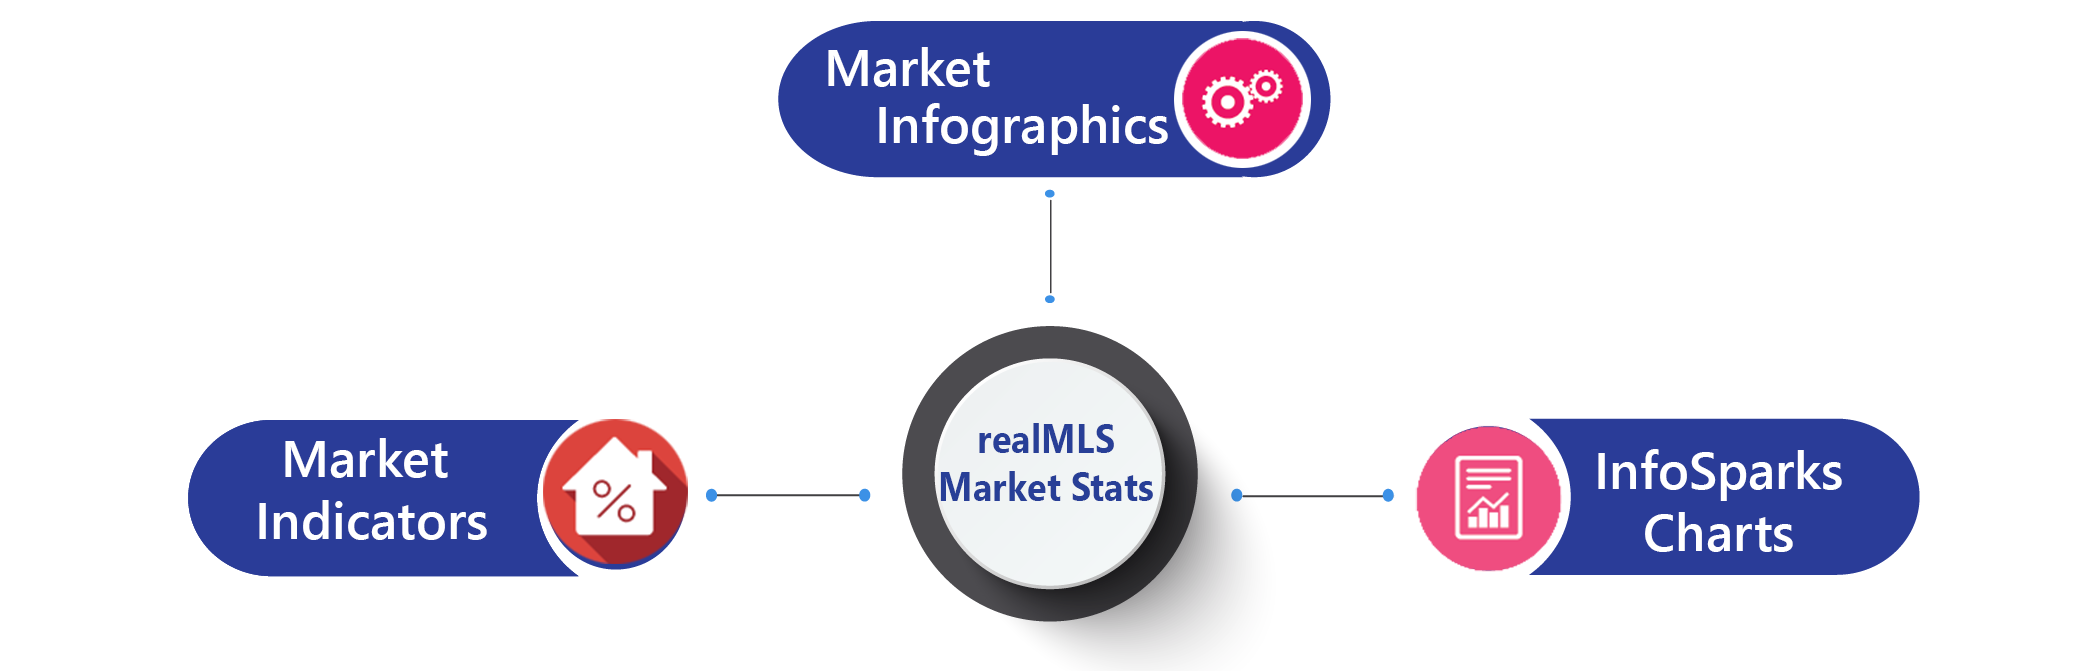 MLS Market stats for Realmls and showingtime stats